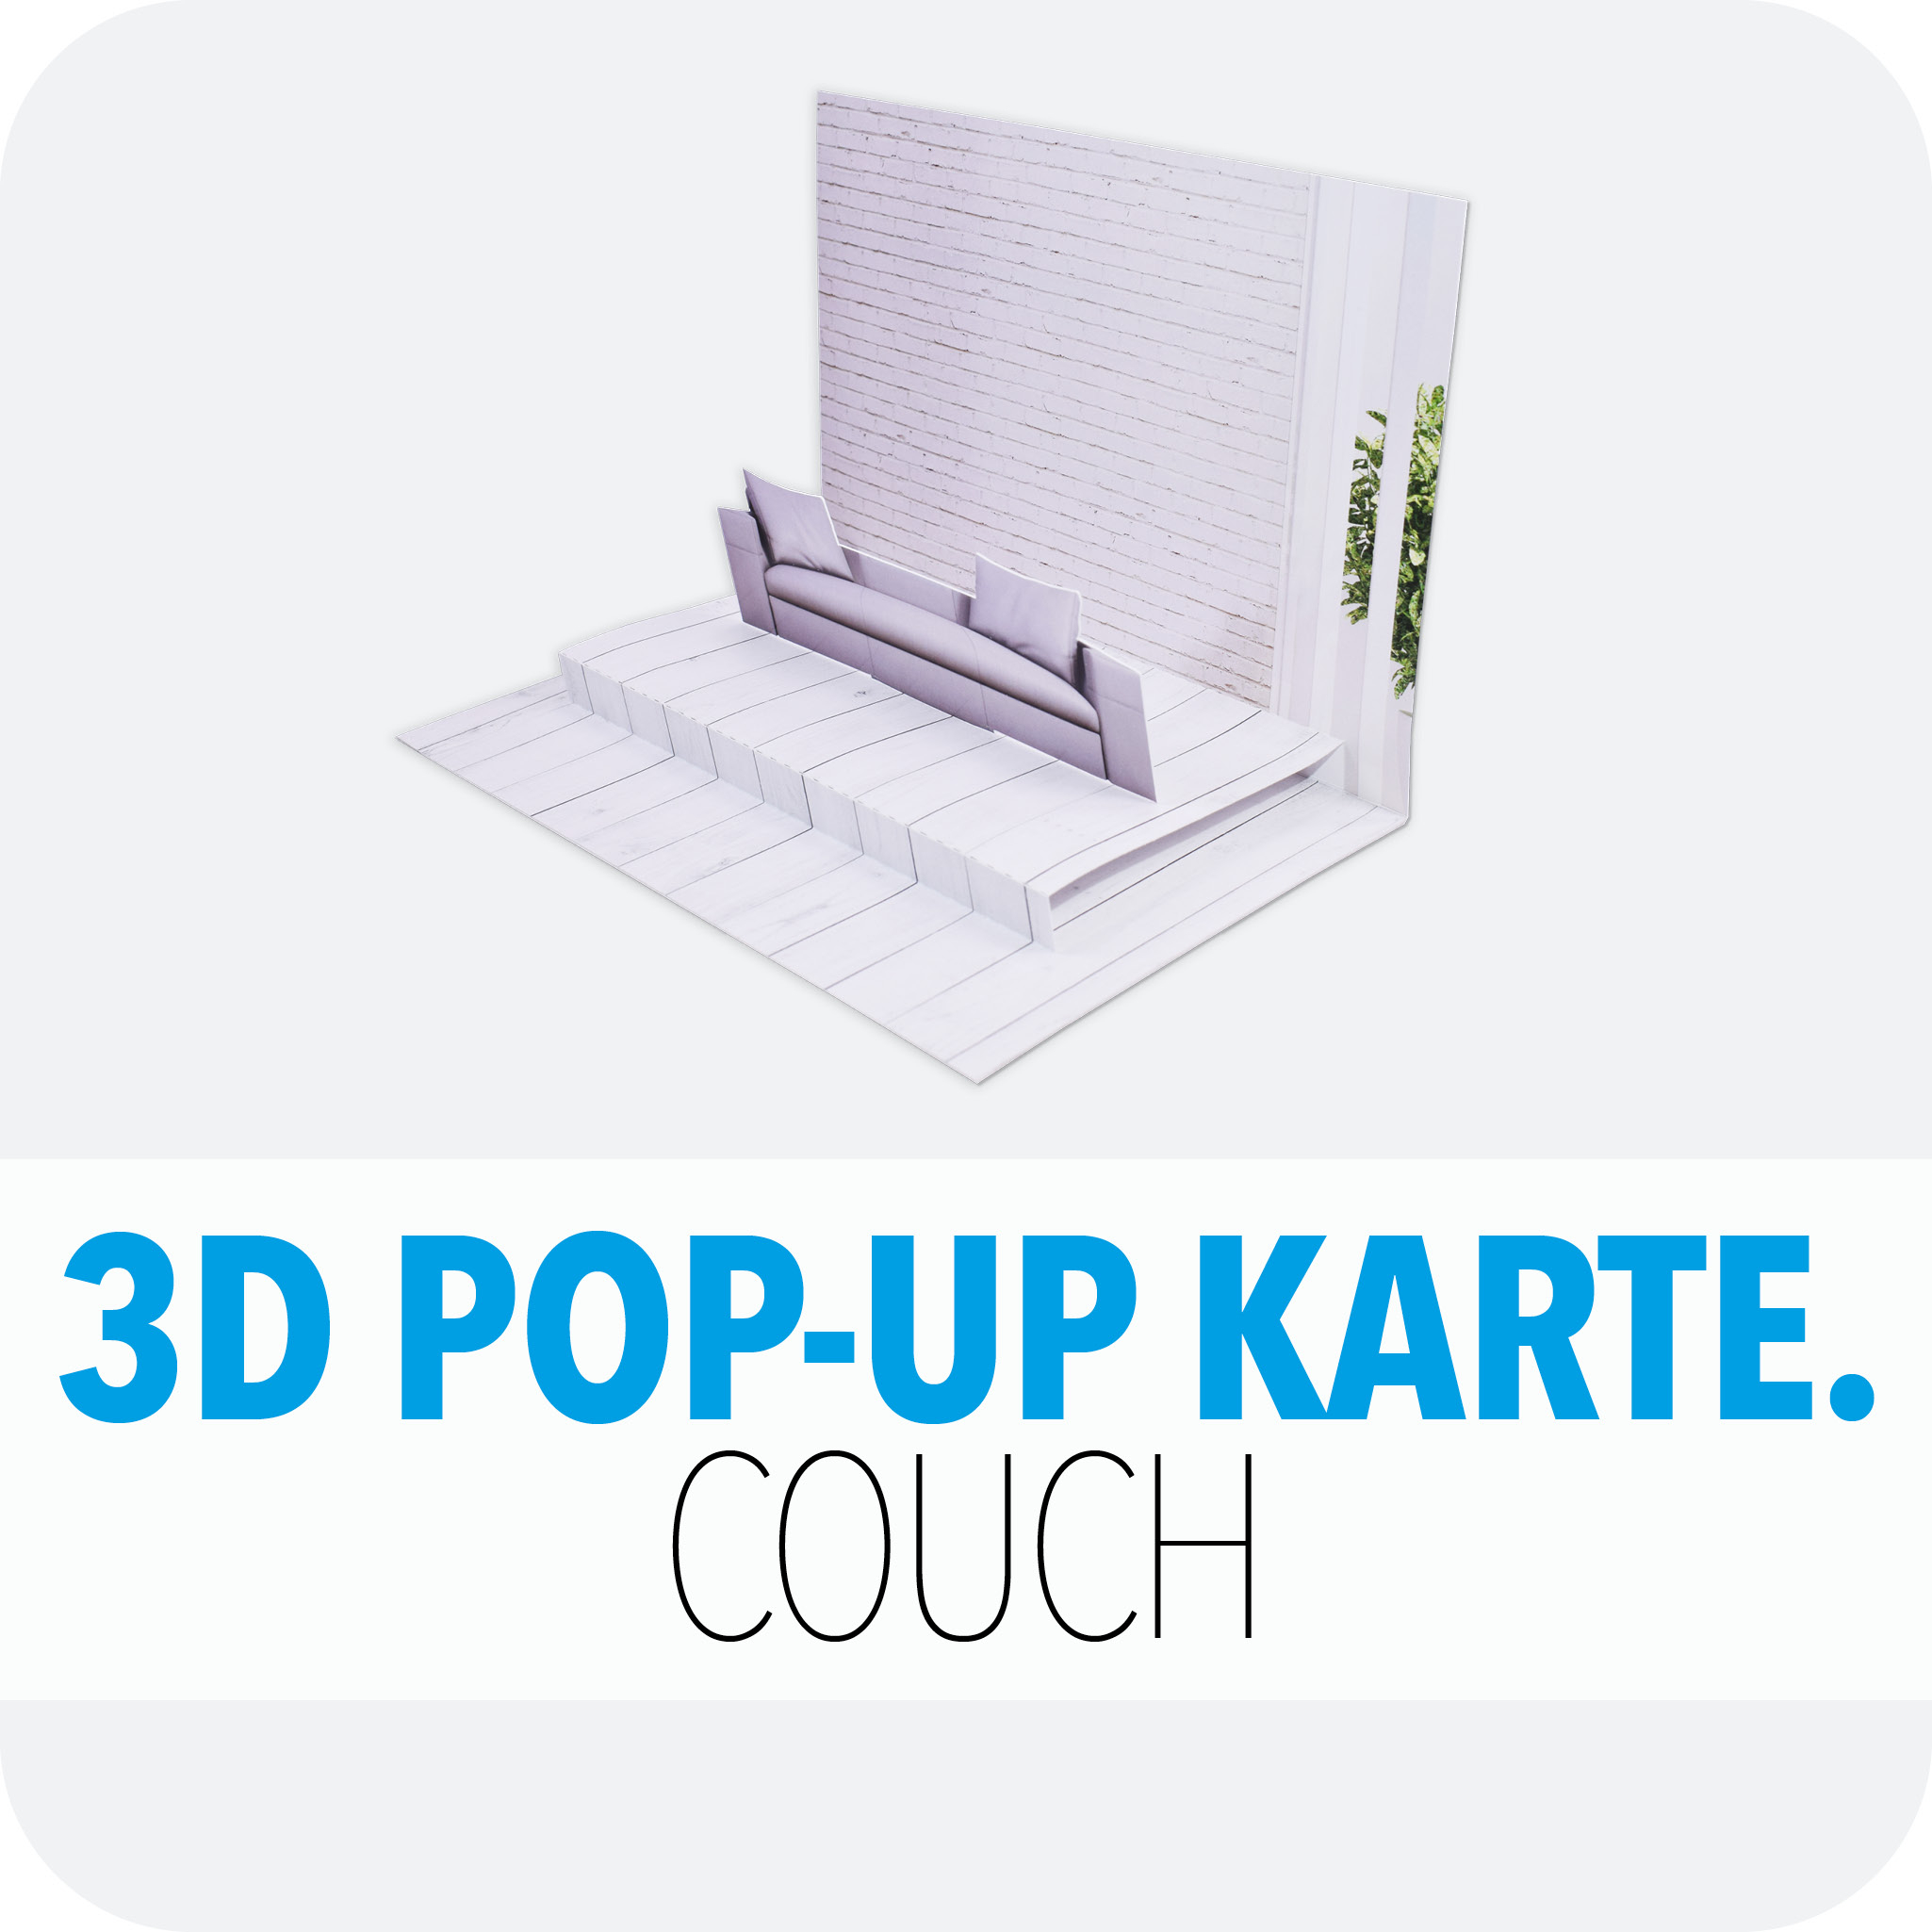 3D Pop-Up Karte Couch